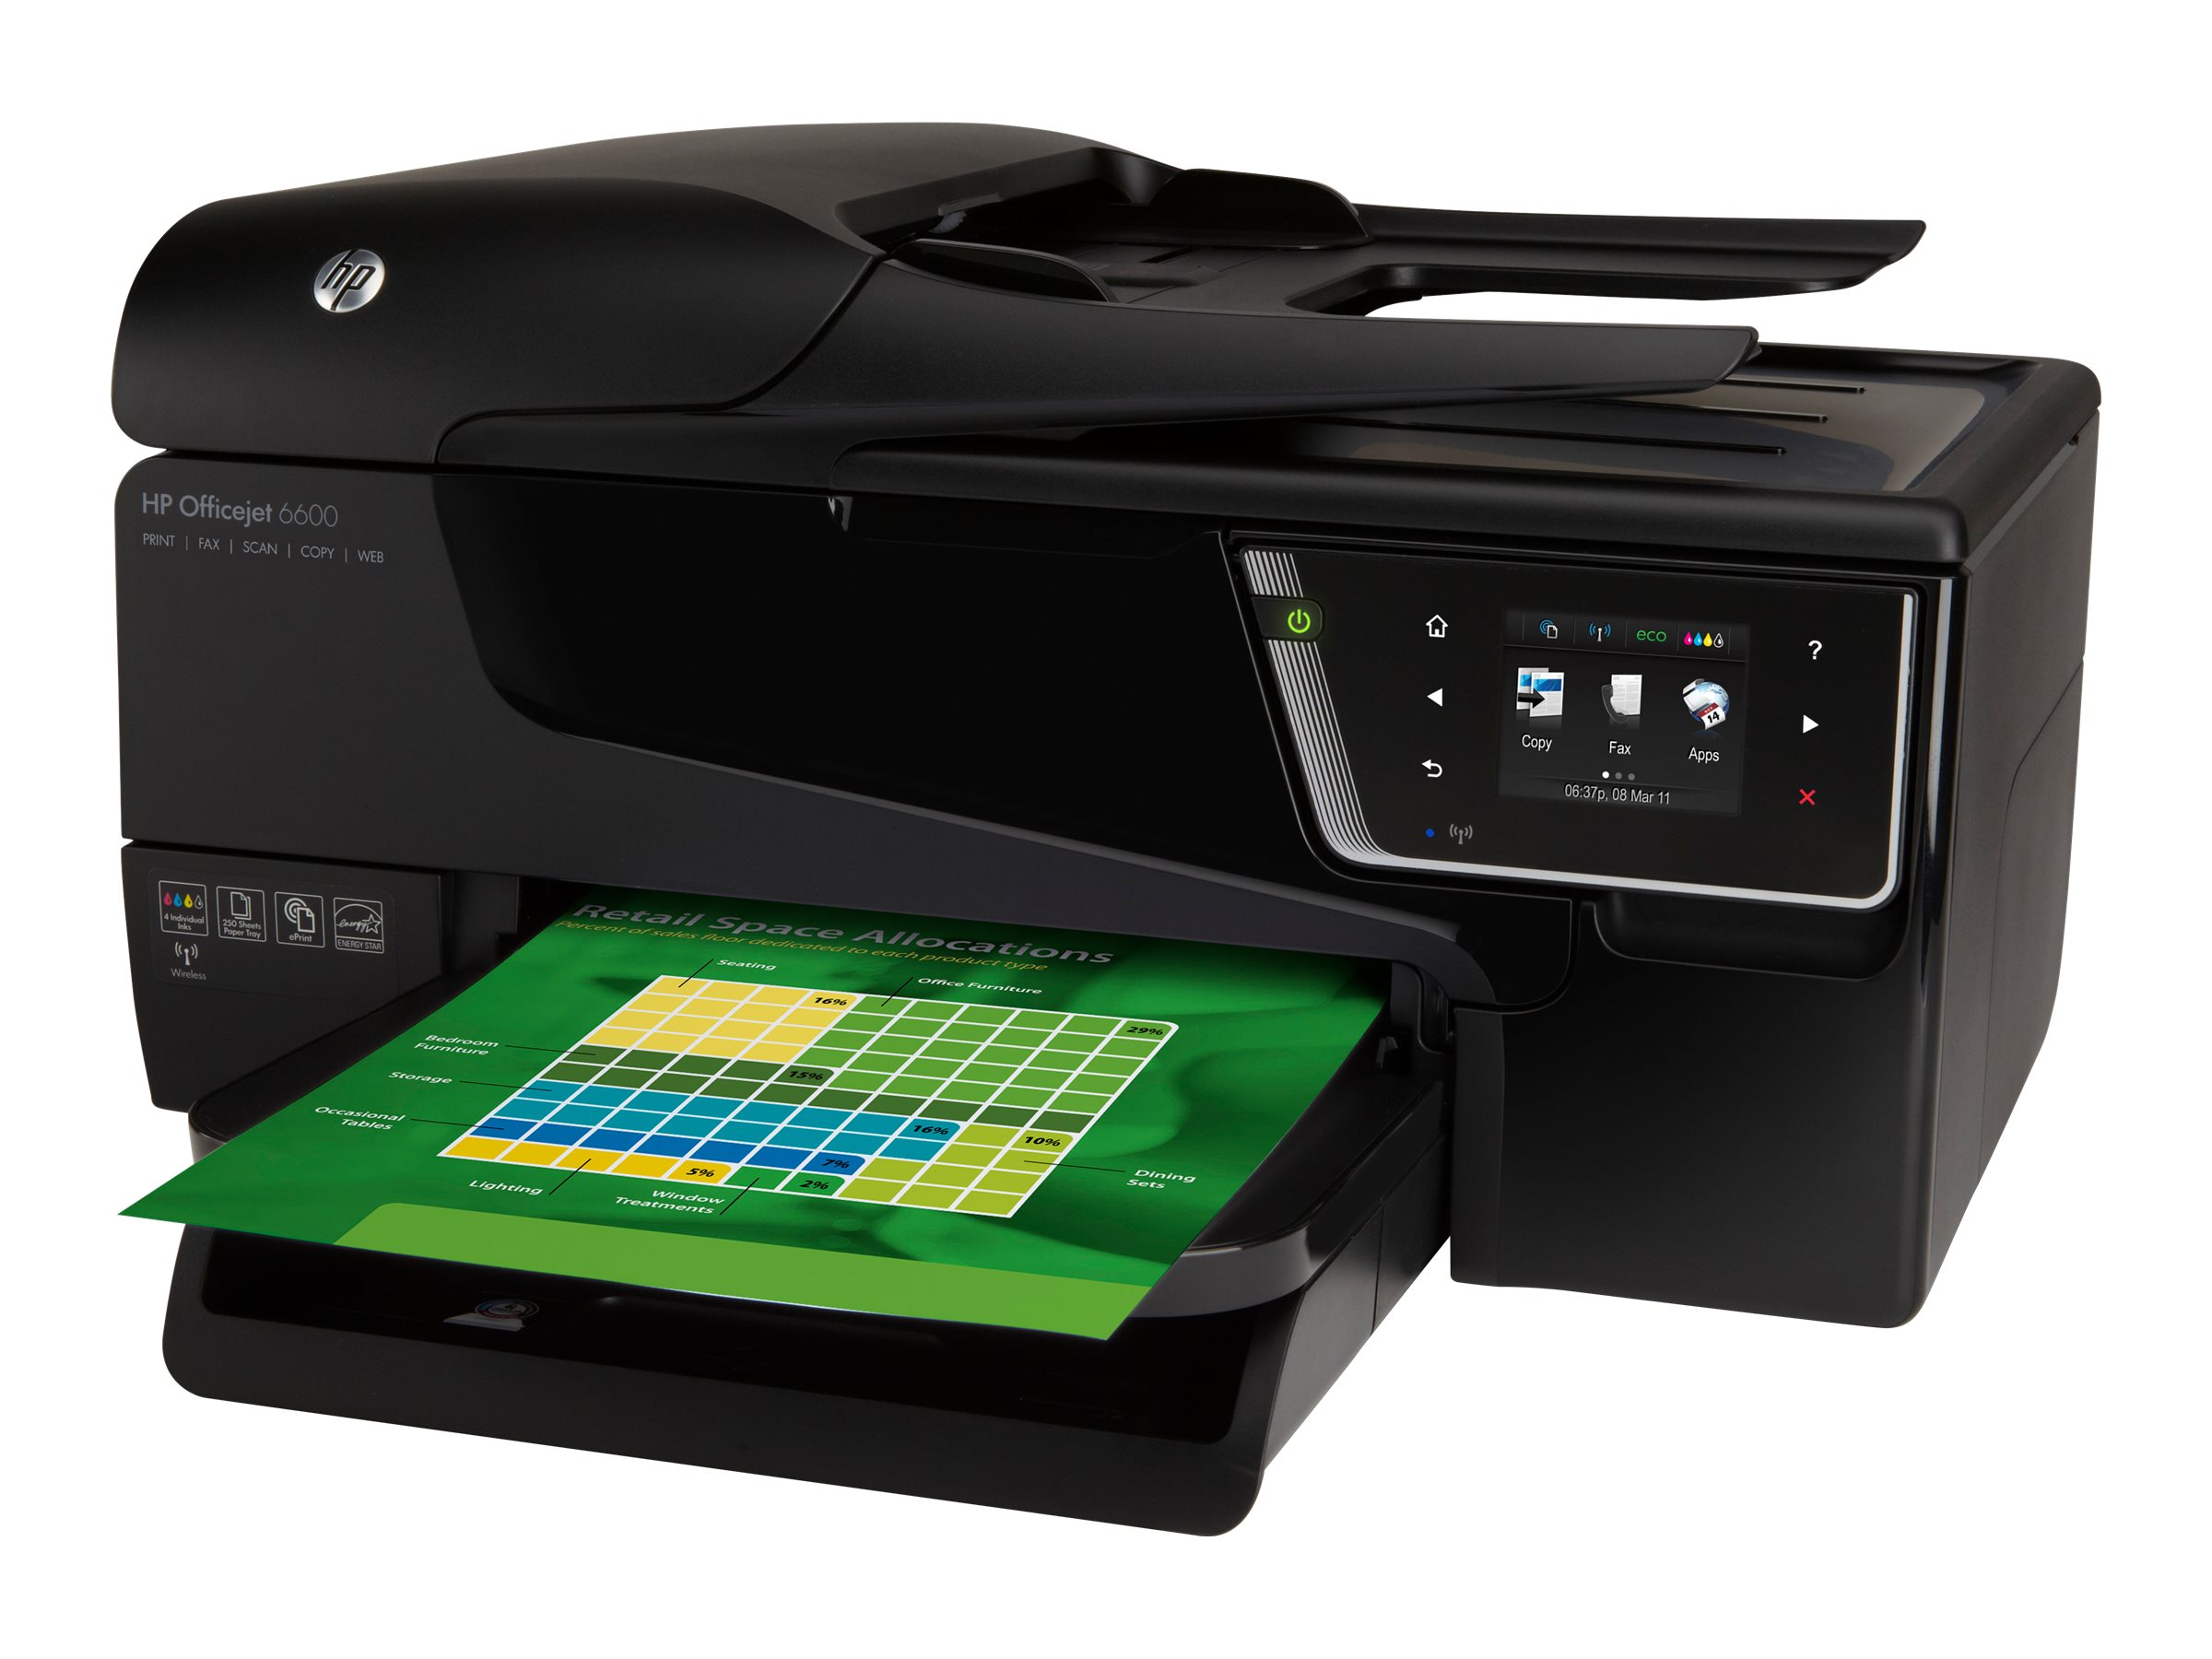 HP Officejet 6600 e-All-in-One H711a - Multifunction printer - color - ink-jet - Legal (8.5 in x 14 in)/A4 (8.25 in x 11.7 in) (original) - Legal (media) - up to 32 ppm (copying) - up to 14 ppm (printing) - 250 sheets - 33.6 Kbps - USB 2.0, Wi-Fi(n) - image 2 of 8